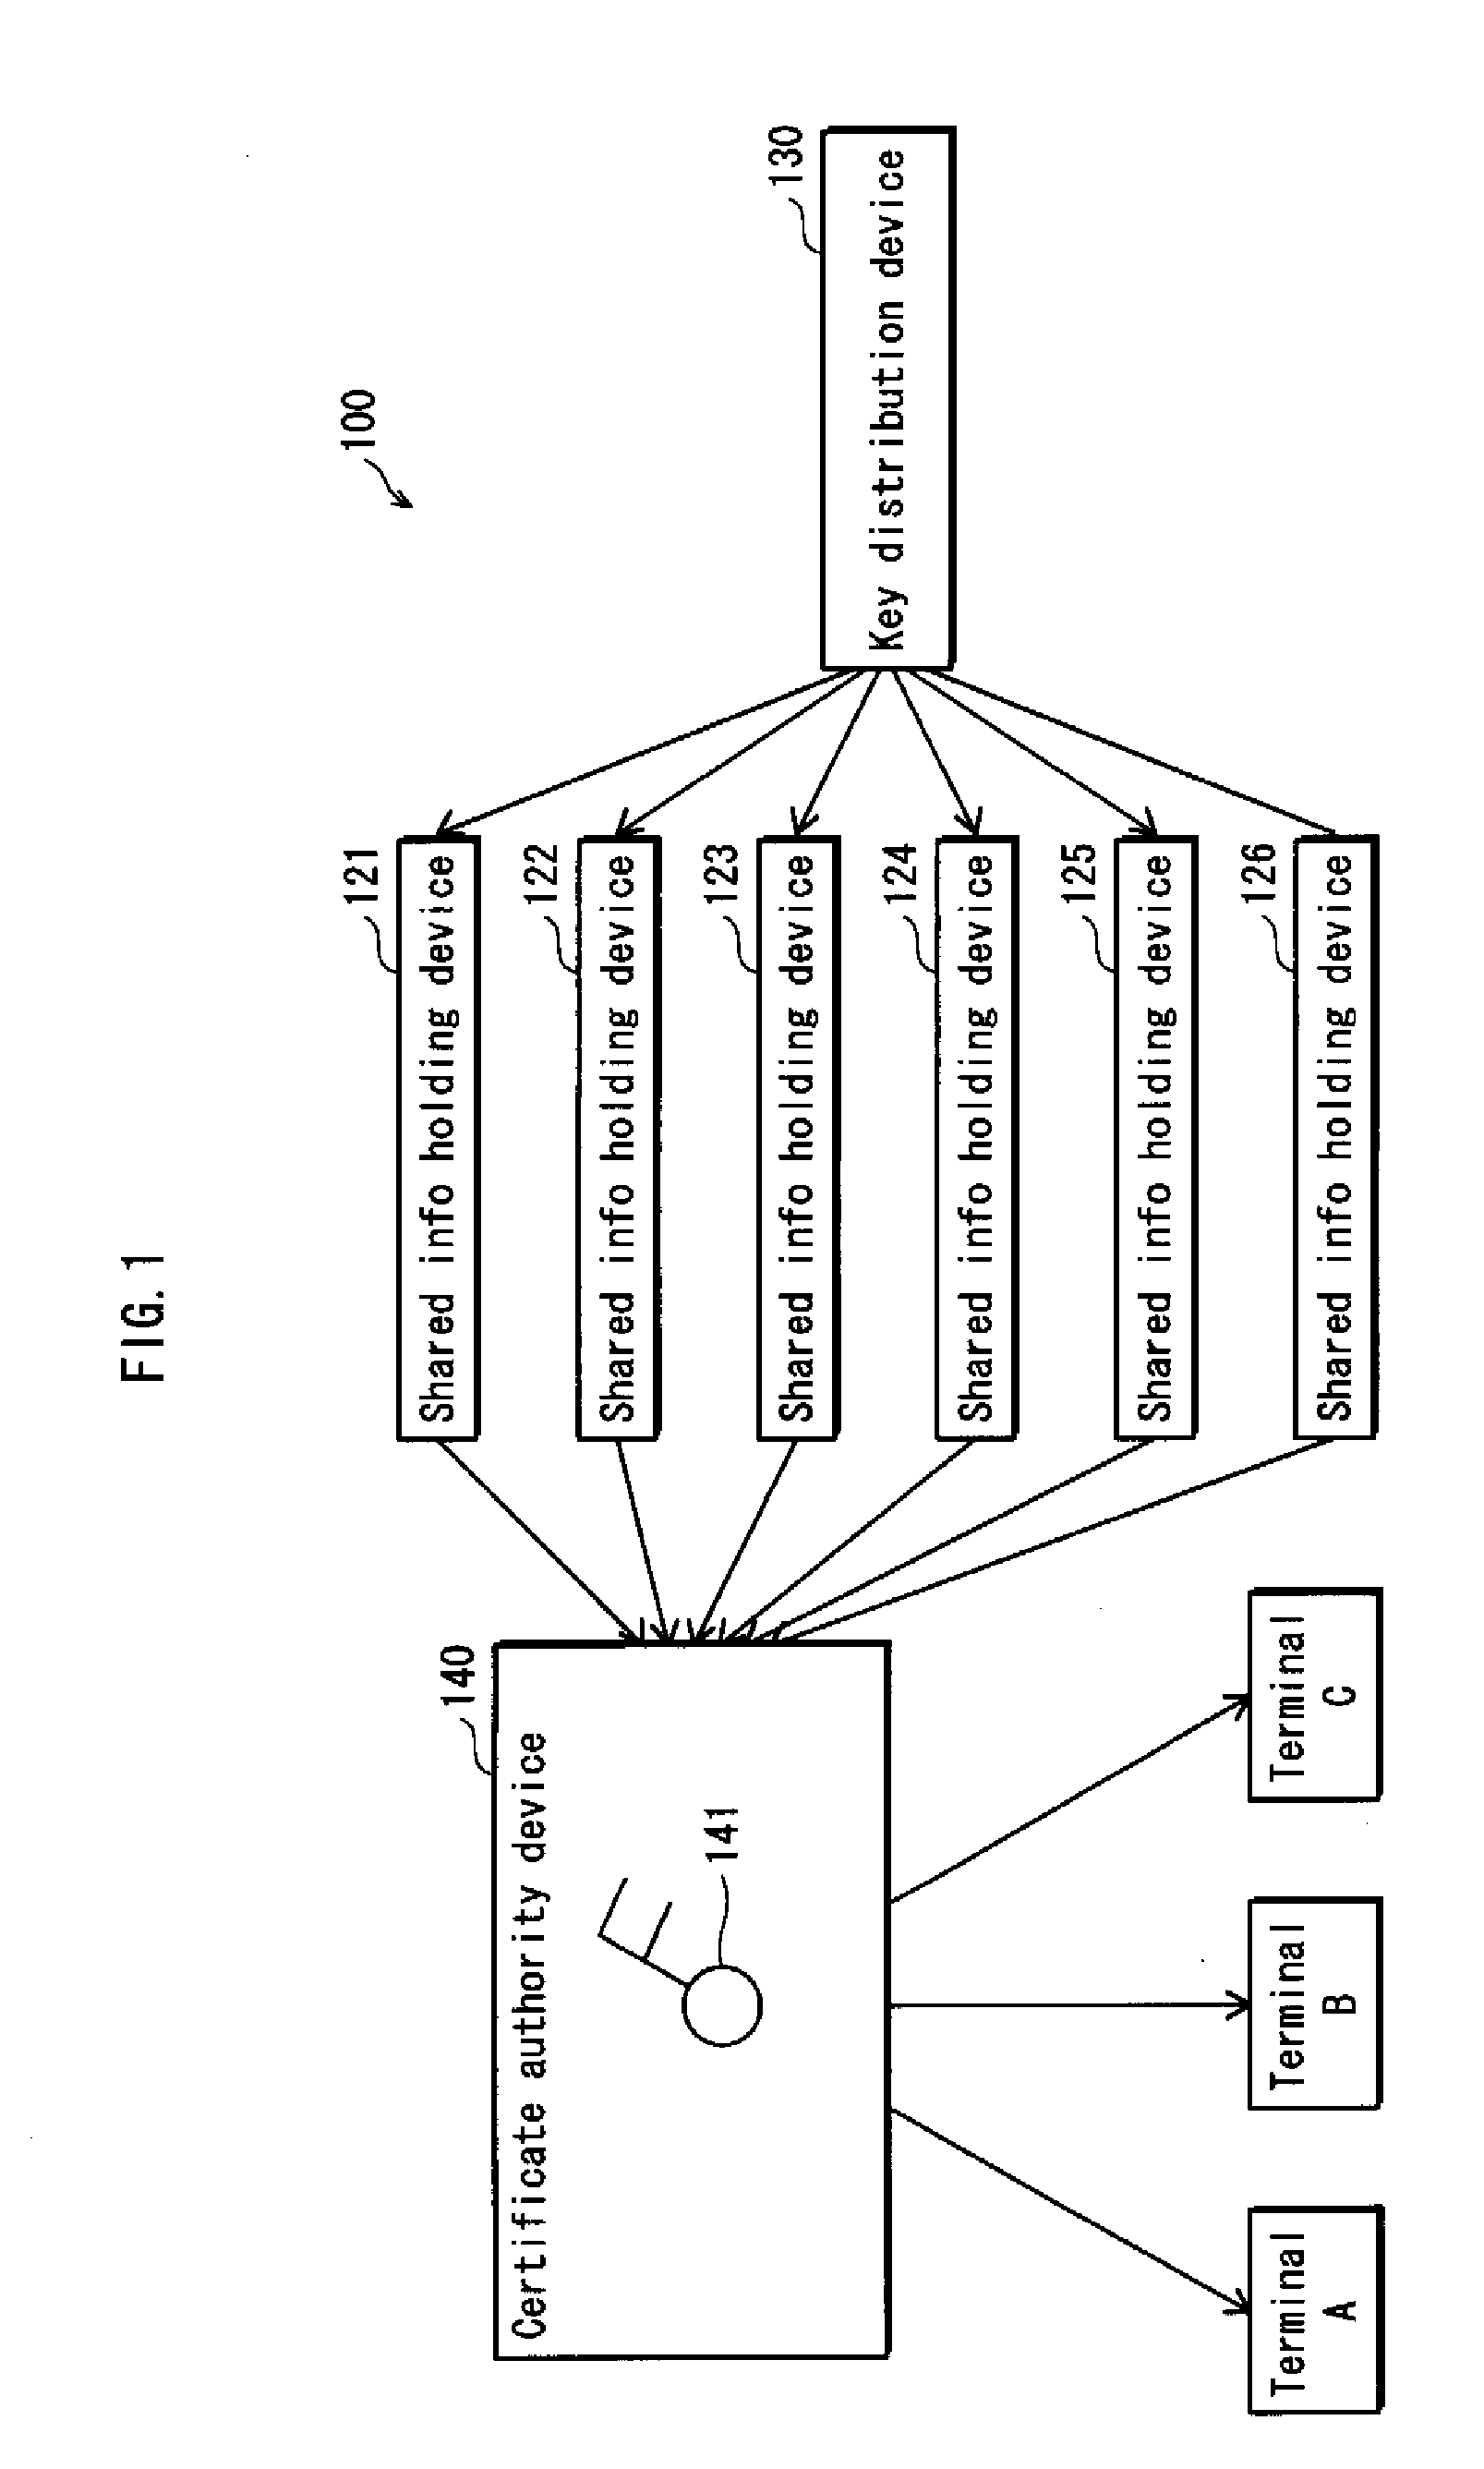 Shared information distributing device, holding device, certificate authority device, and system